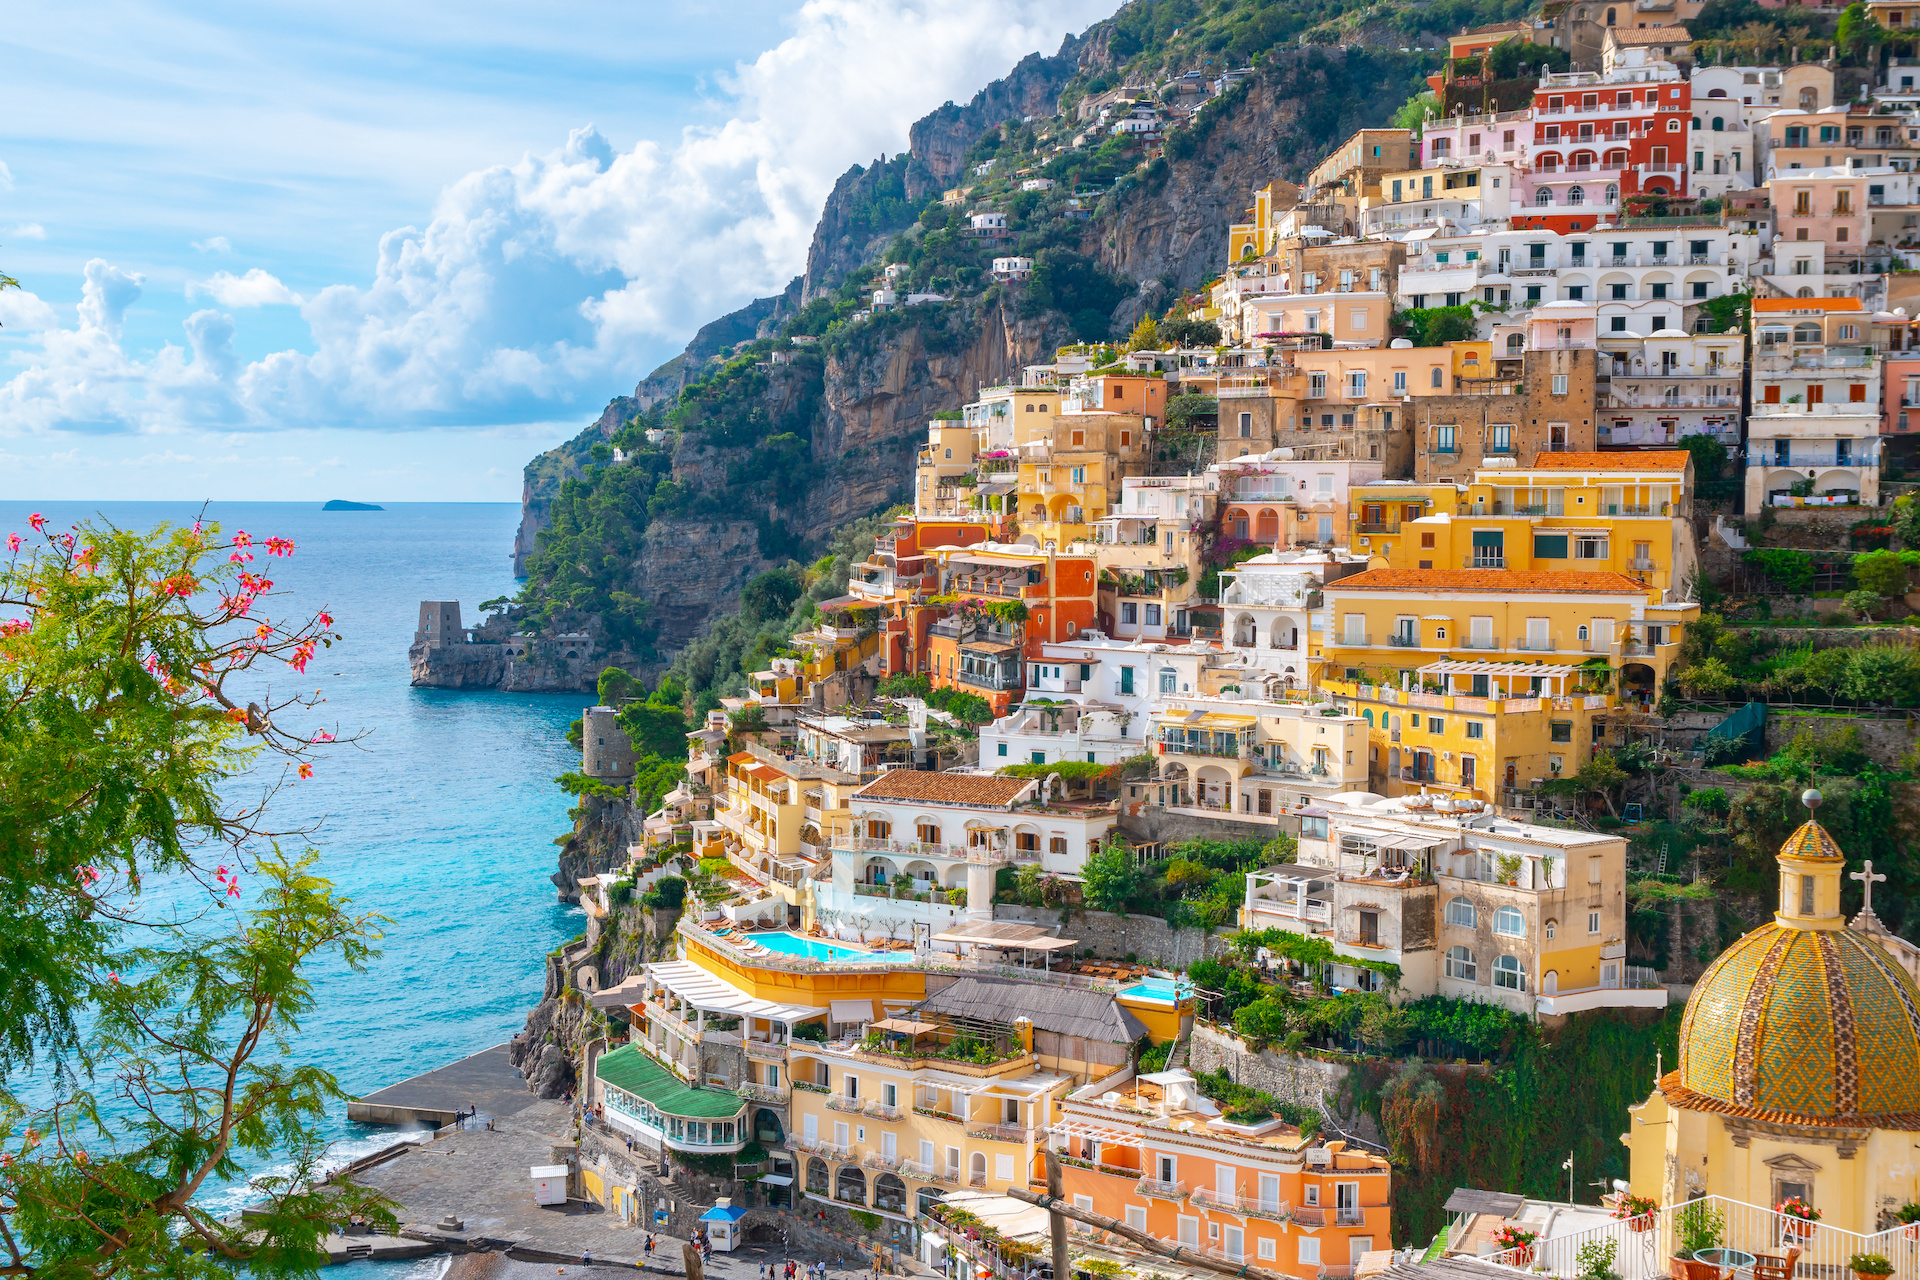 Positano, Italy - Best Day Every Day